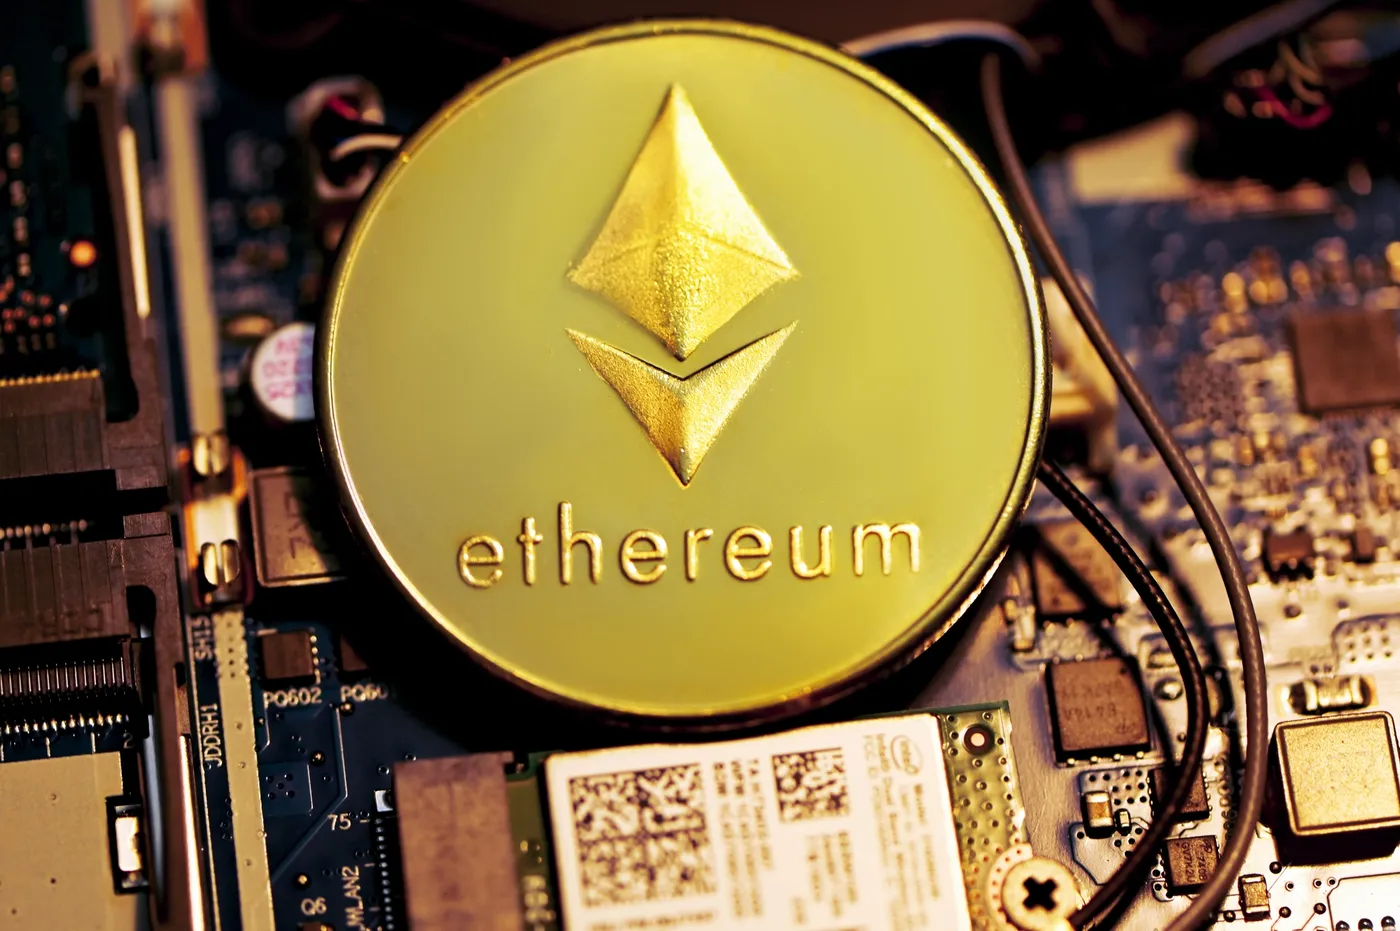 Gold ethereum coin on a circuit board background